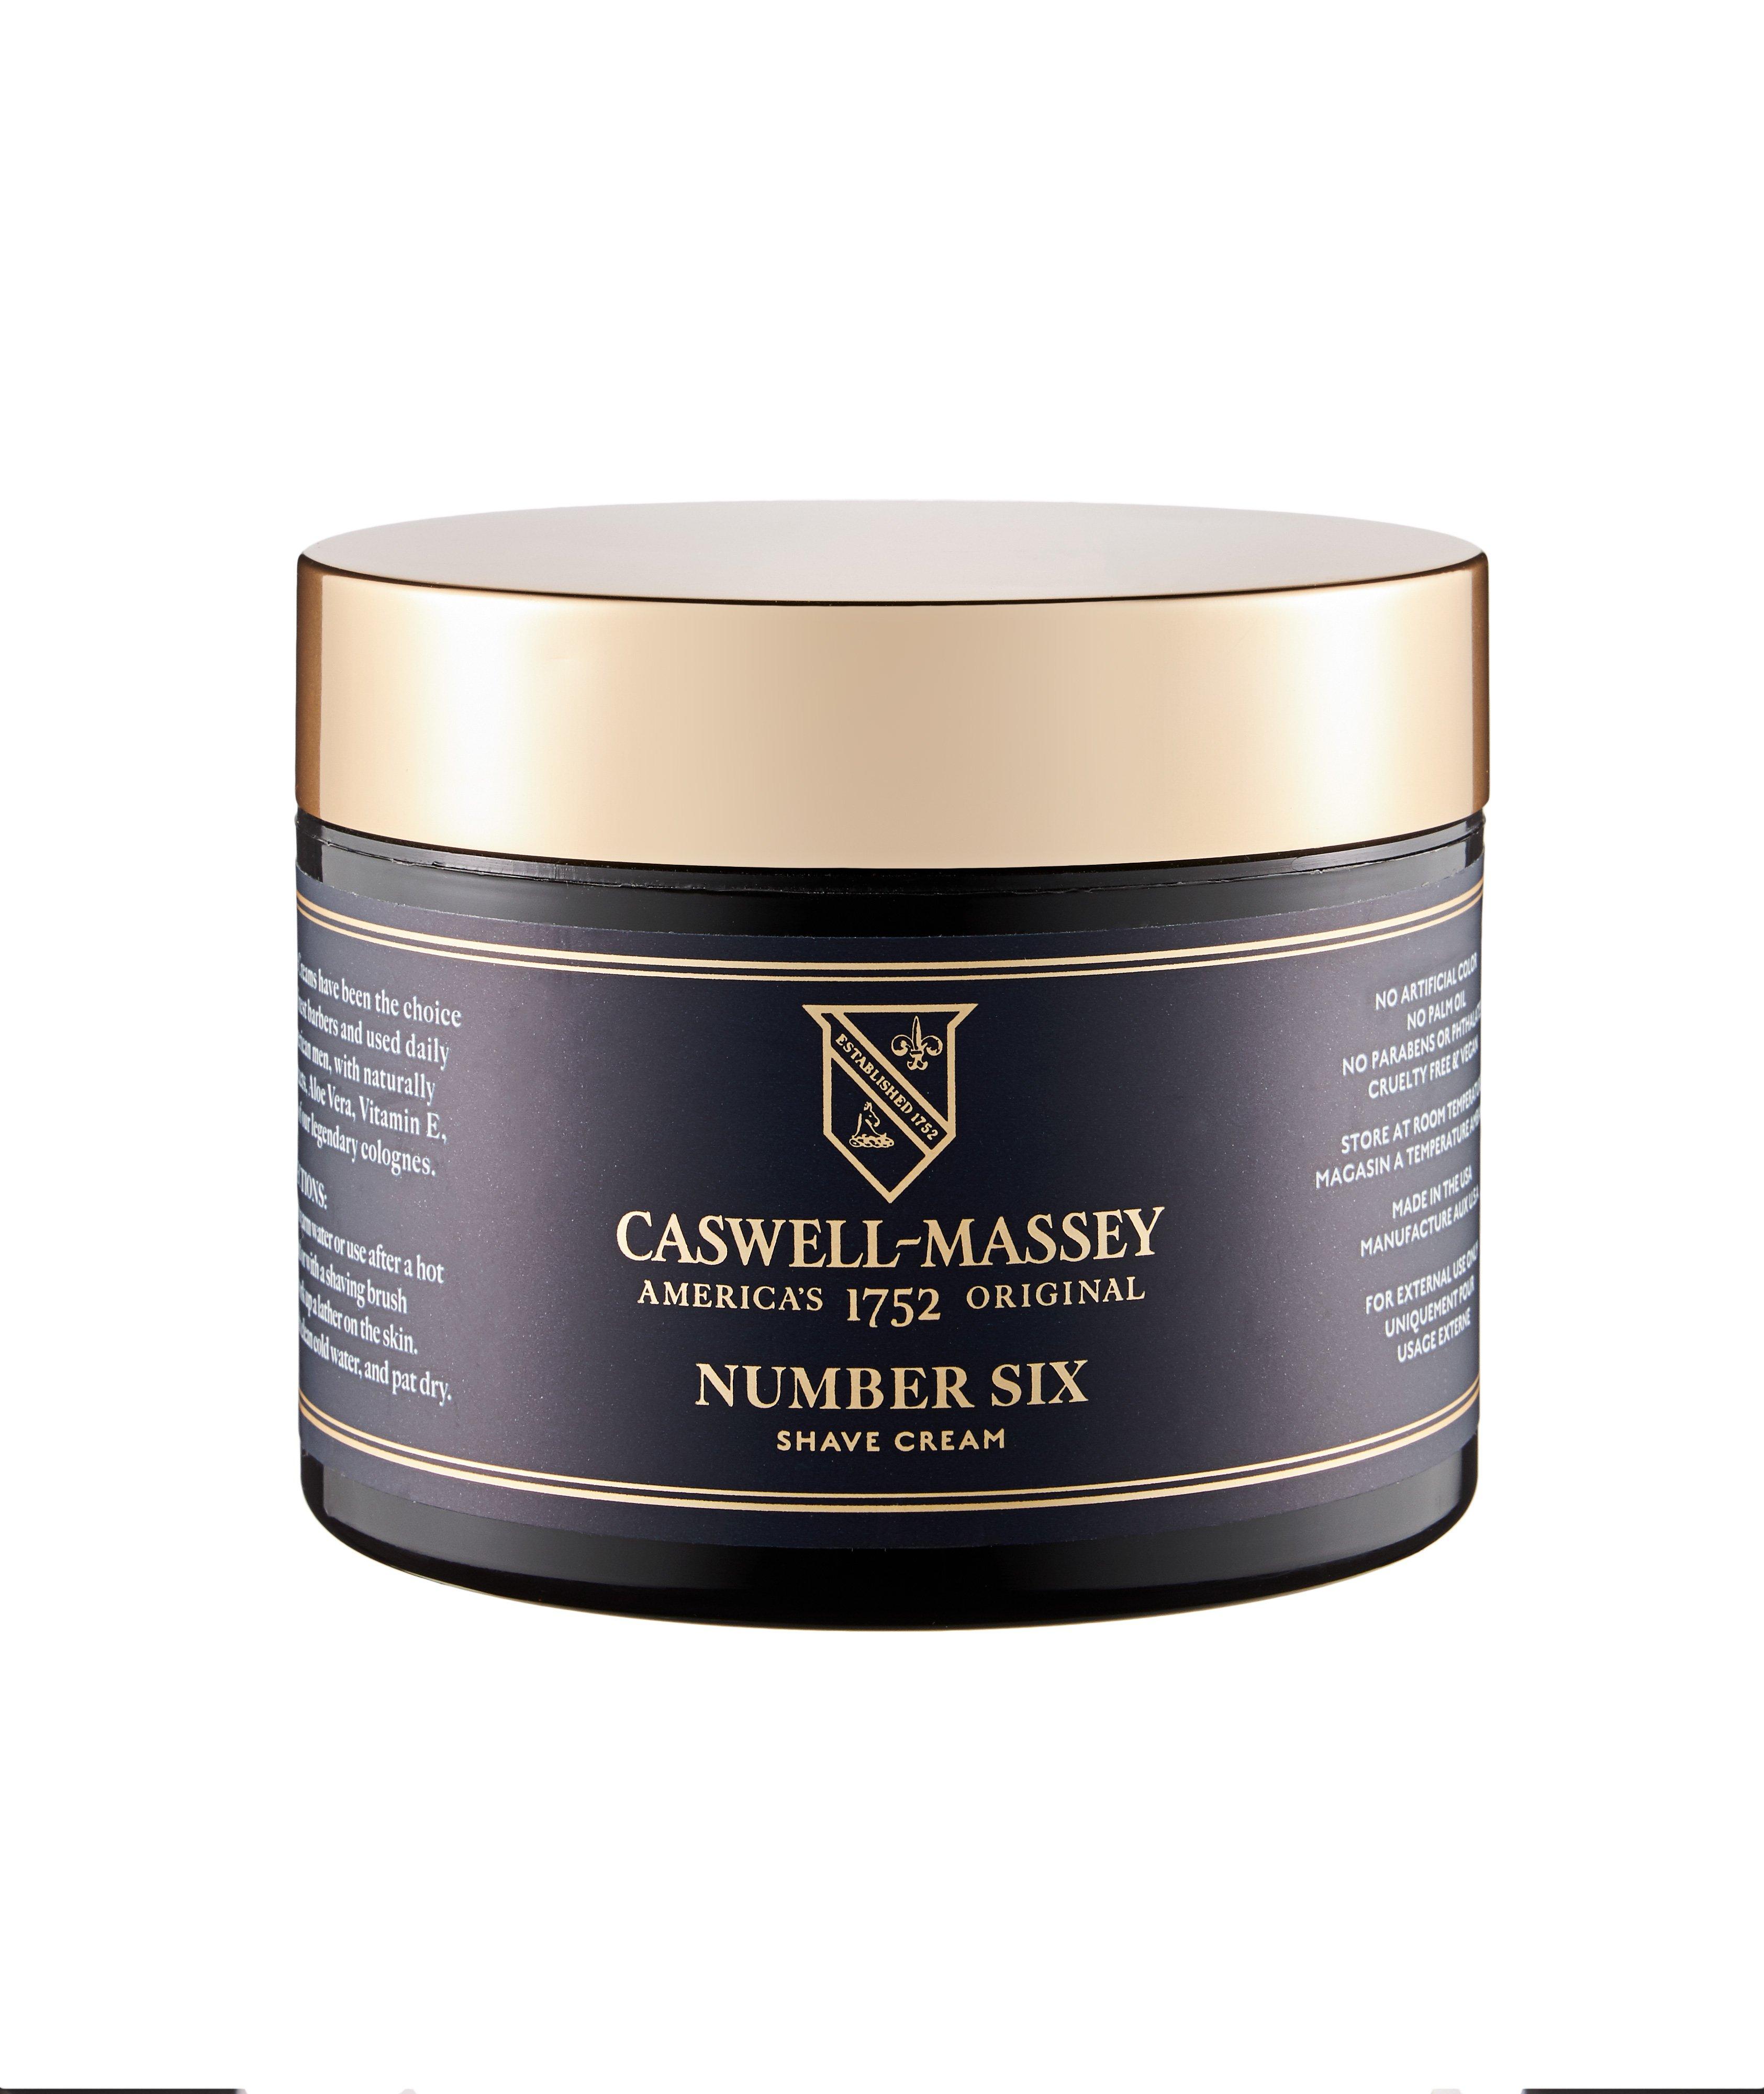 Caswell Massey Heritage Number Six Shave Cream in Jar image 0